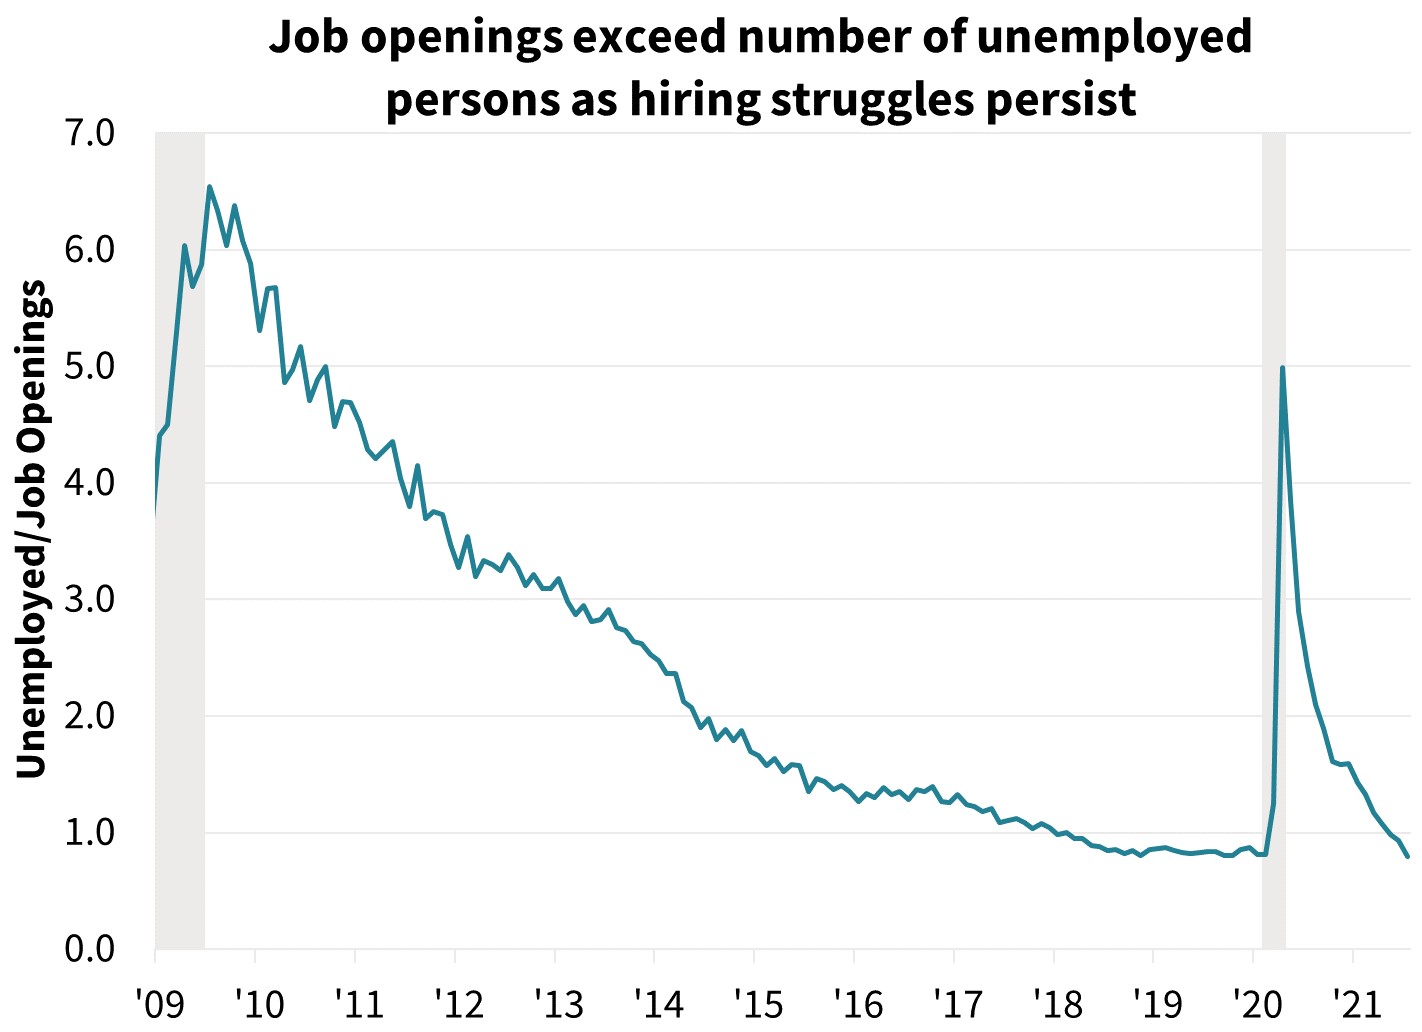  Job openings exceed number of unemployed persons as hiring struggles persists 